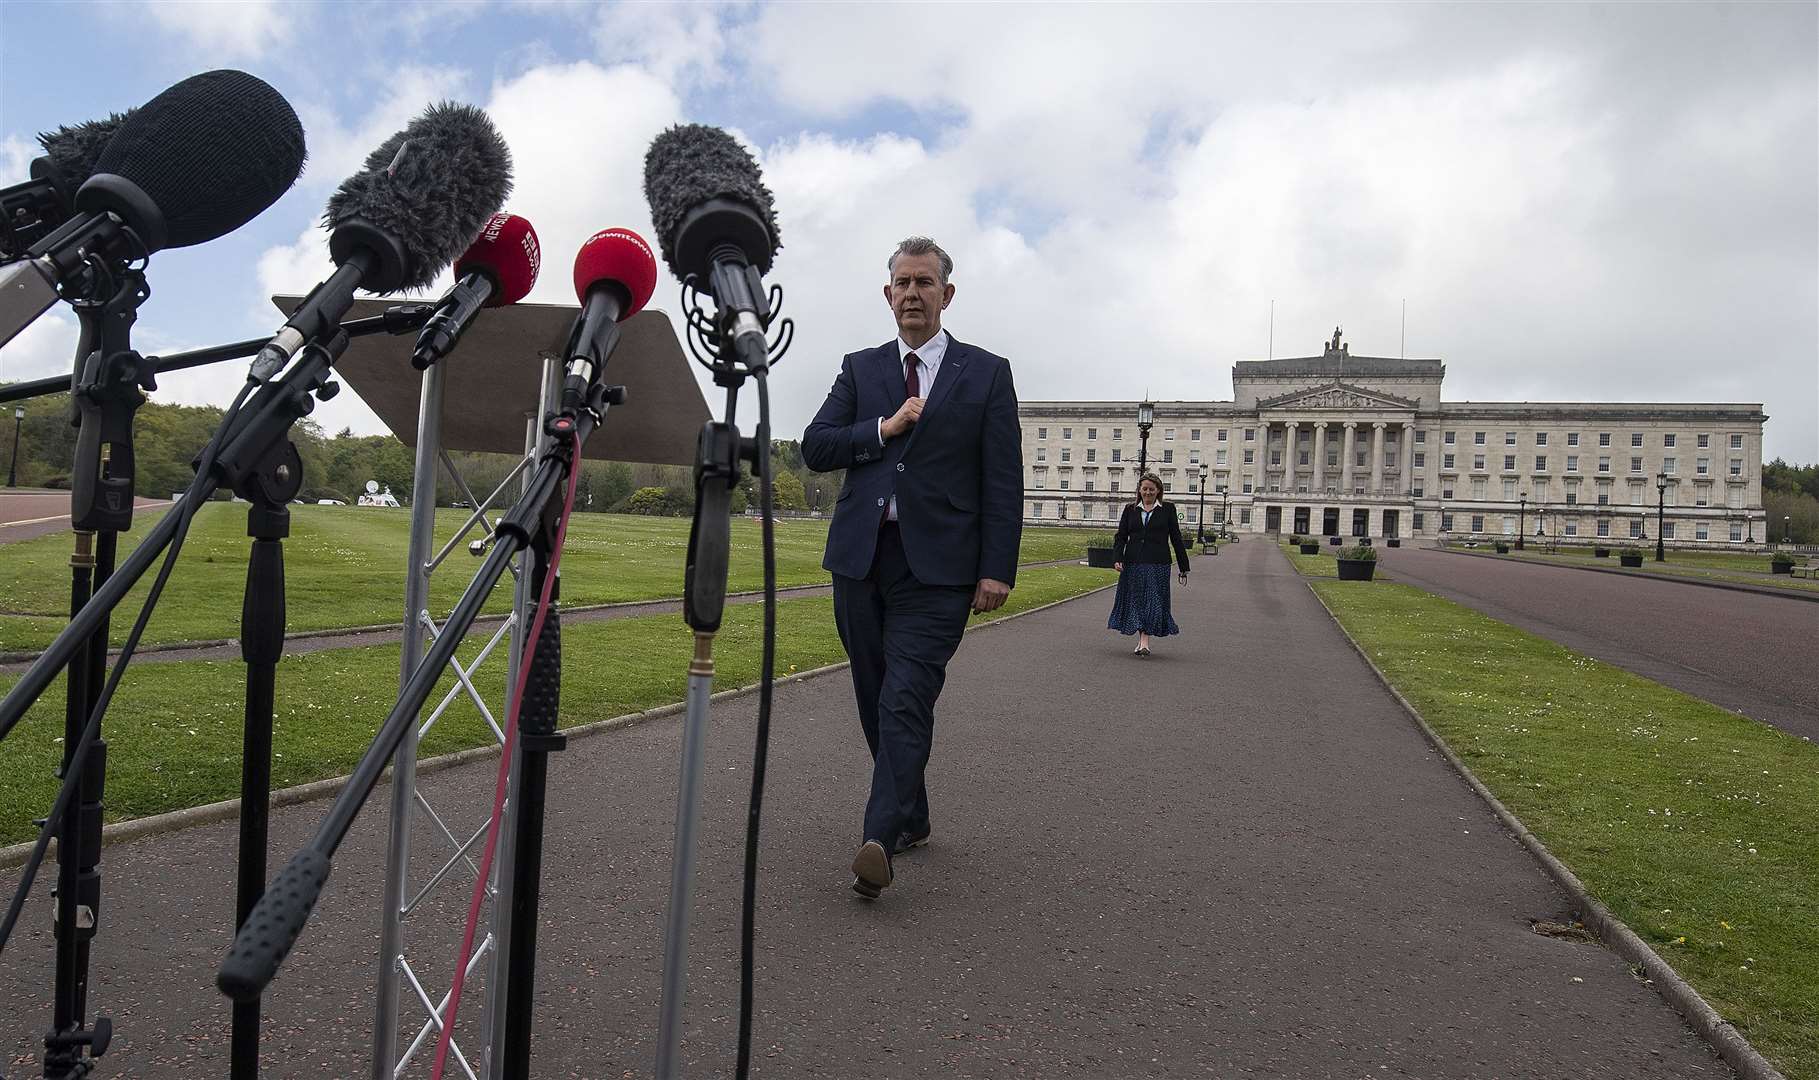 Edwin Poots will take over as DUP leader from Arlene Foster (Brian Lawless/PA)